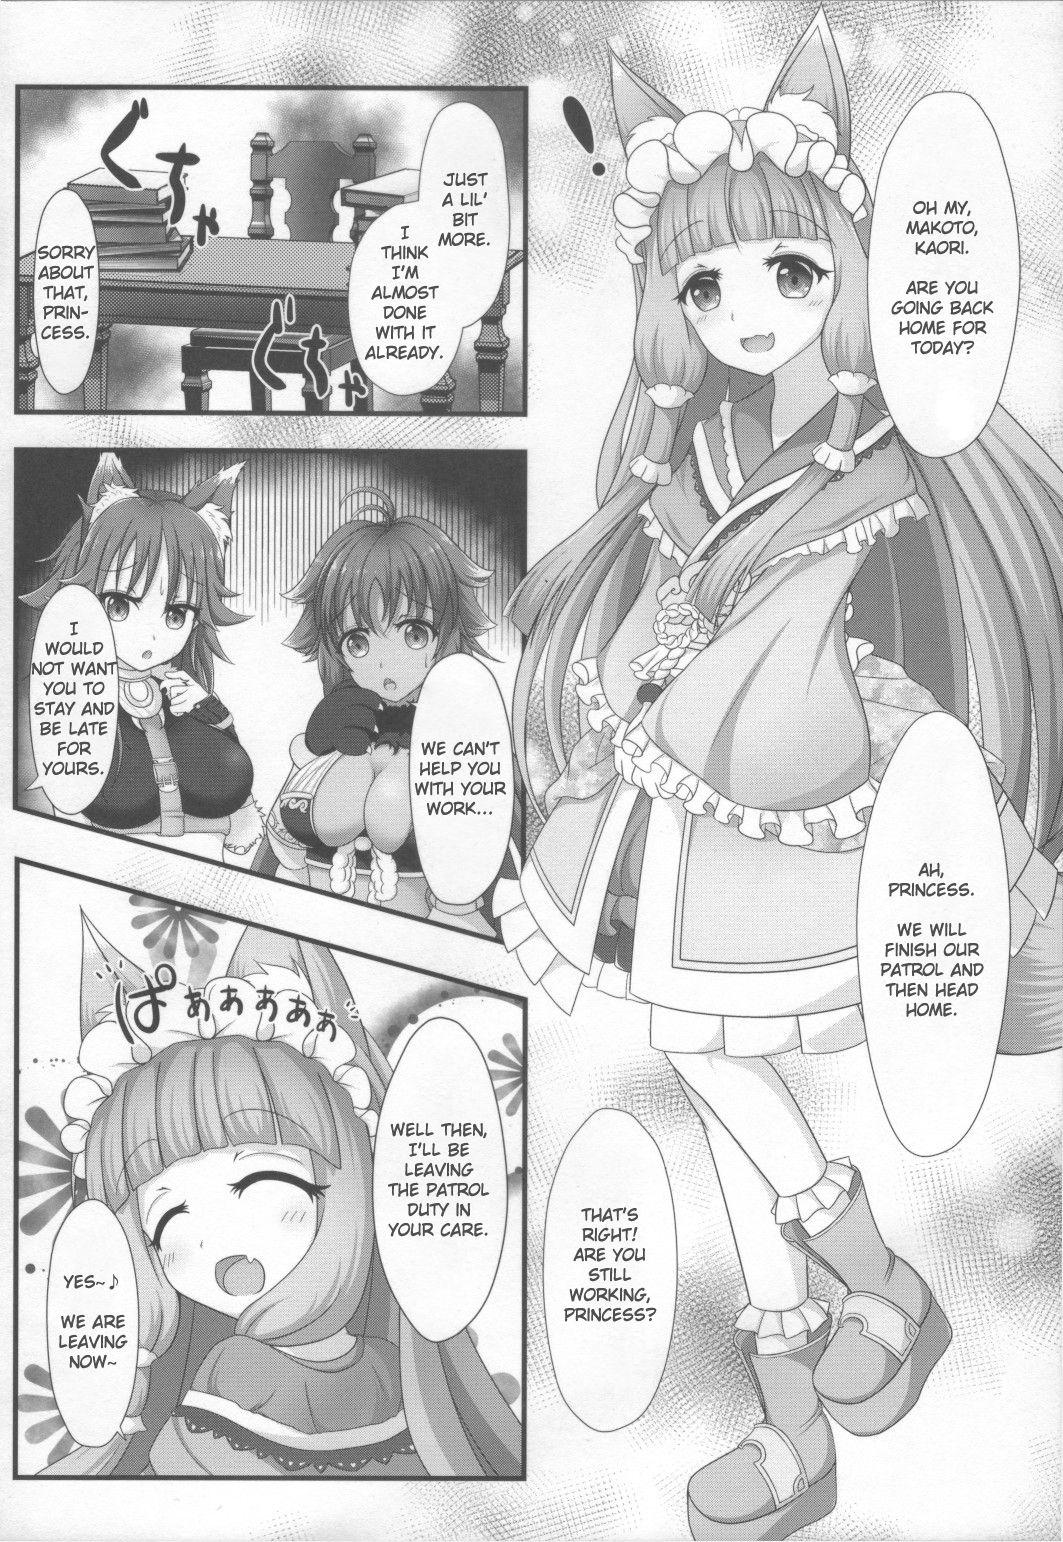 Gemendo Maho Hime Connect! - Princess connect Licking - Page 3